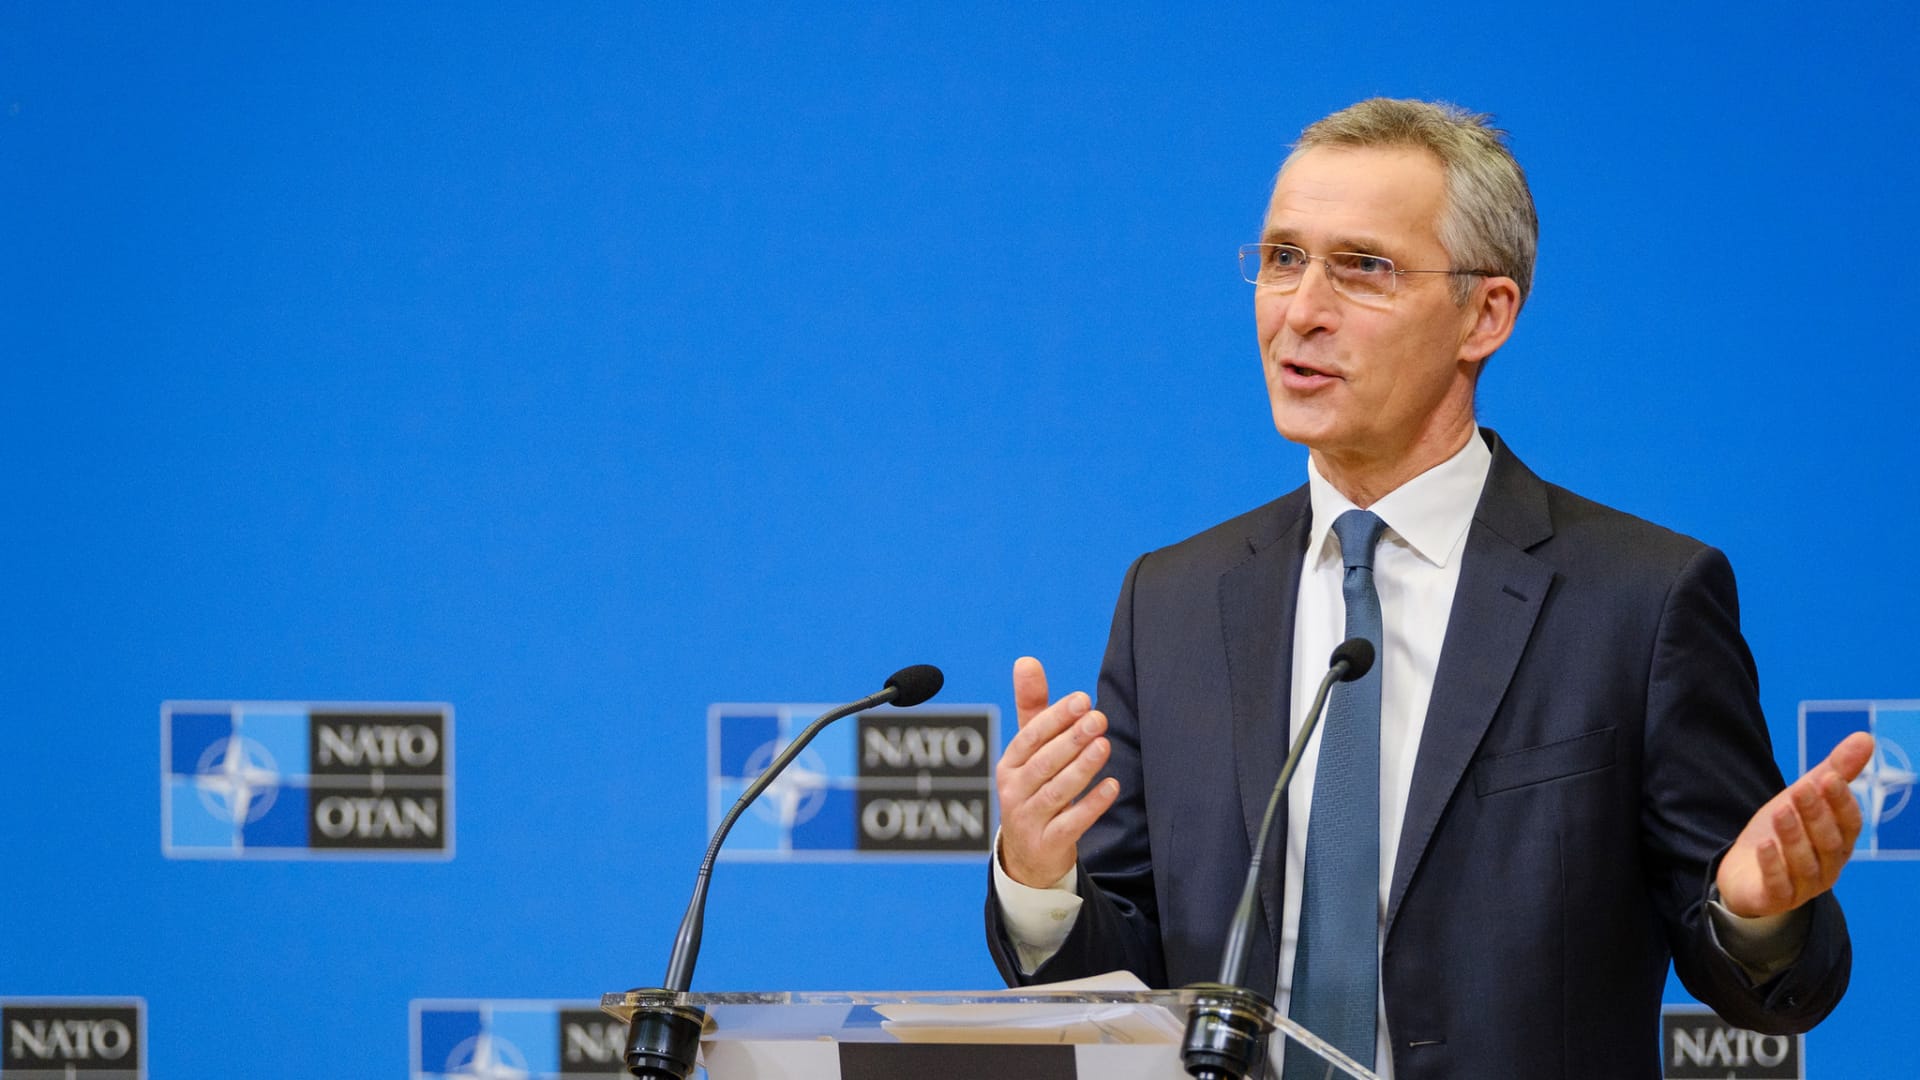 NATO Secretary General Jens Stoltenberg holds a press conference on February 15, 2021, ahead of the meetings of NATO Defence Ministers at NATO Headquarters in Brussels, Belgium.